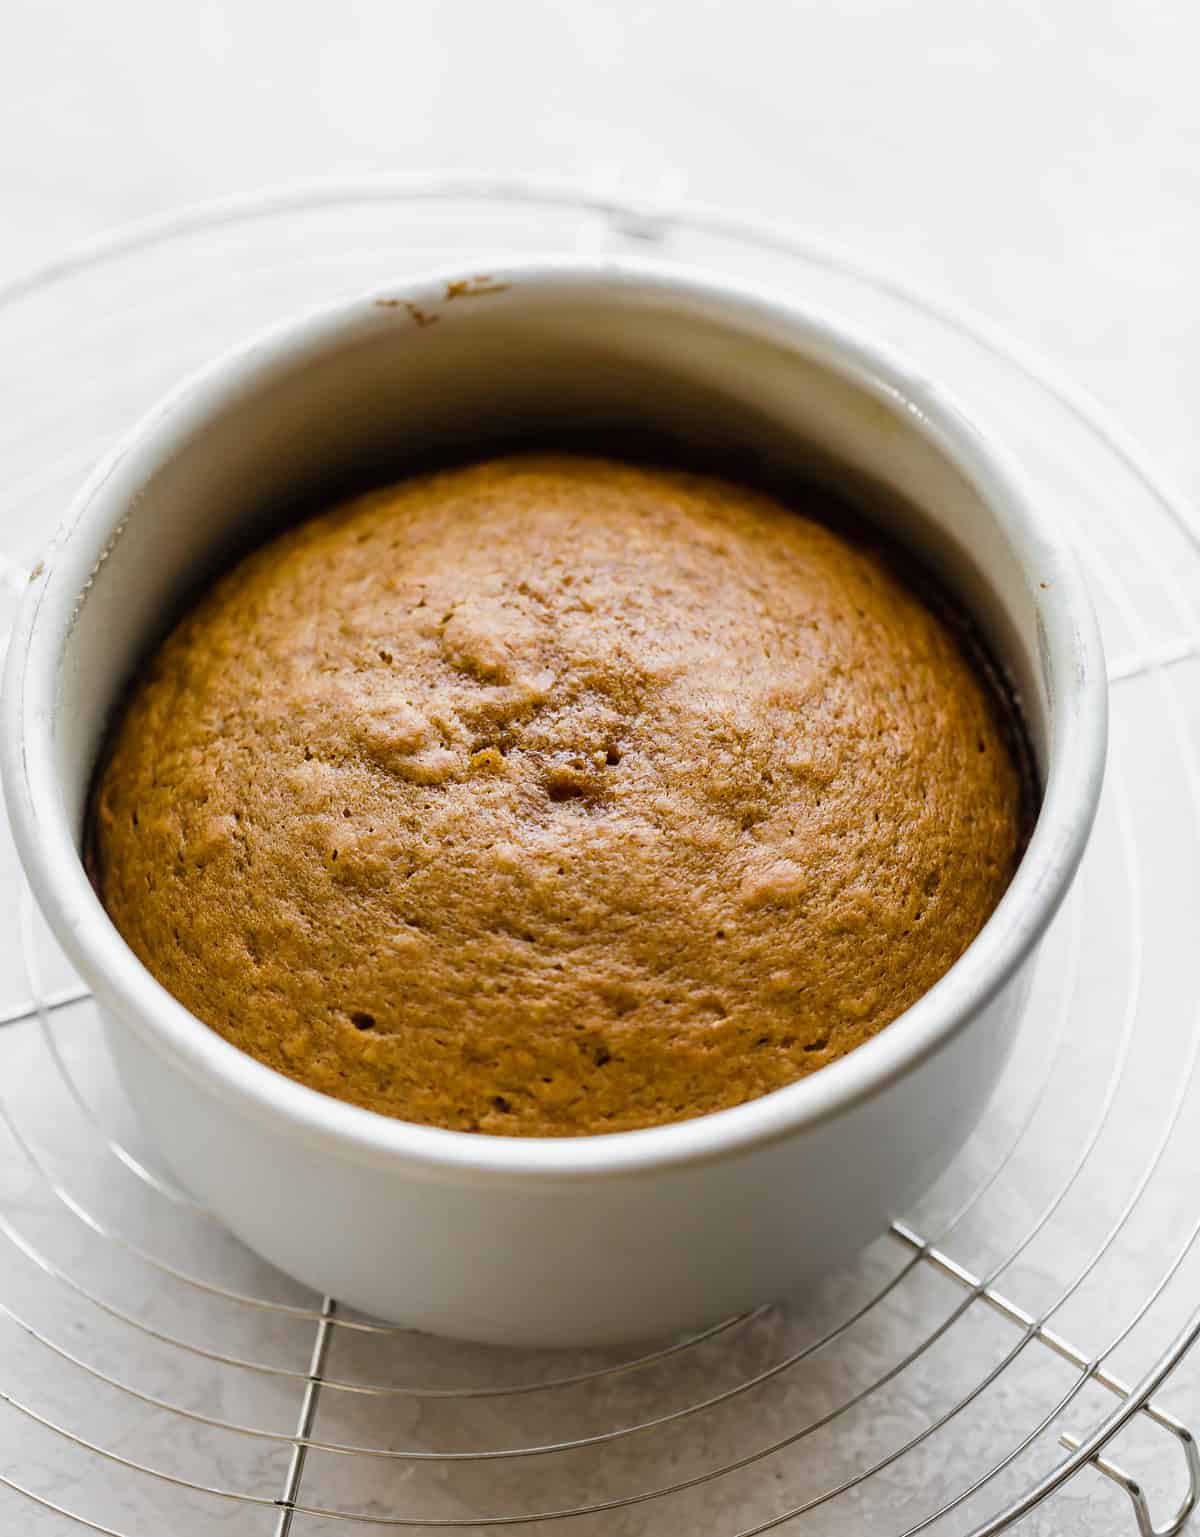 A baked Pumpkin Cake in a round cake pan.